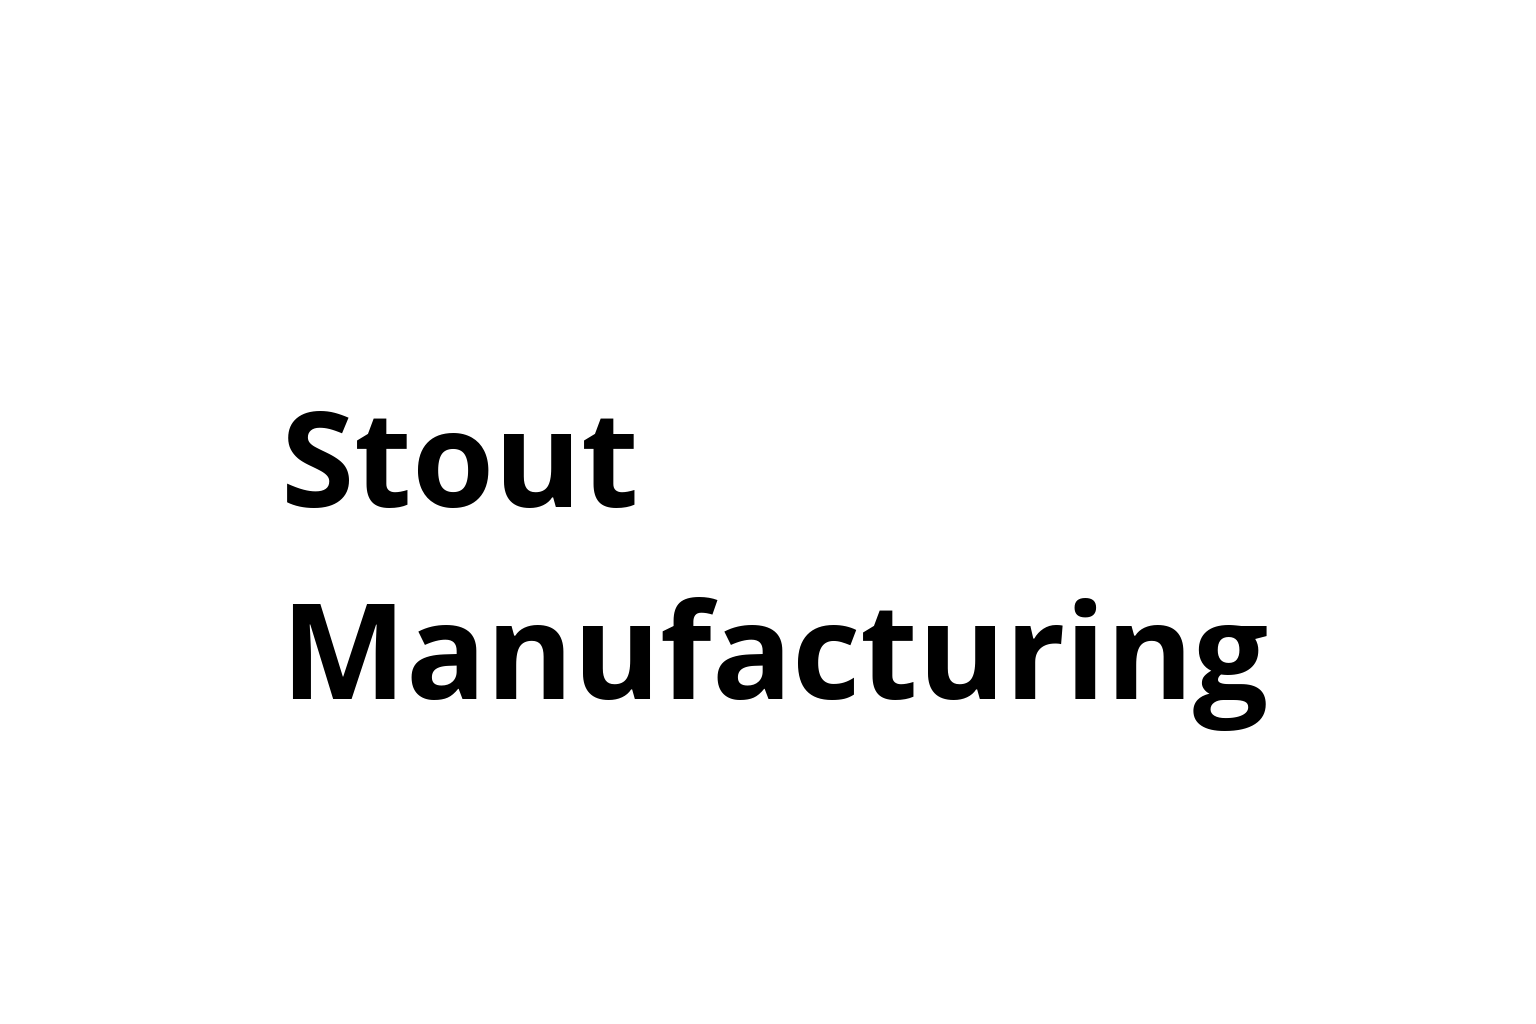 Stout Manufacturing